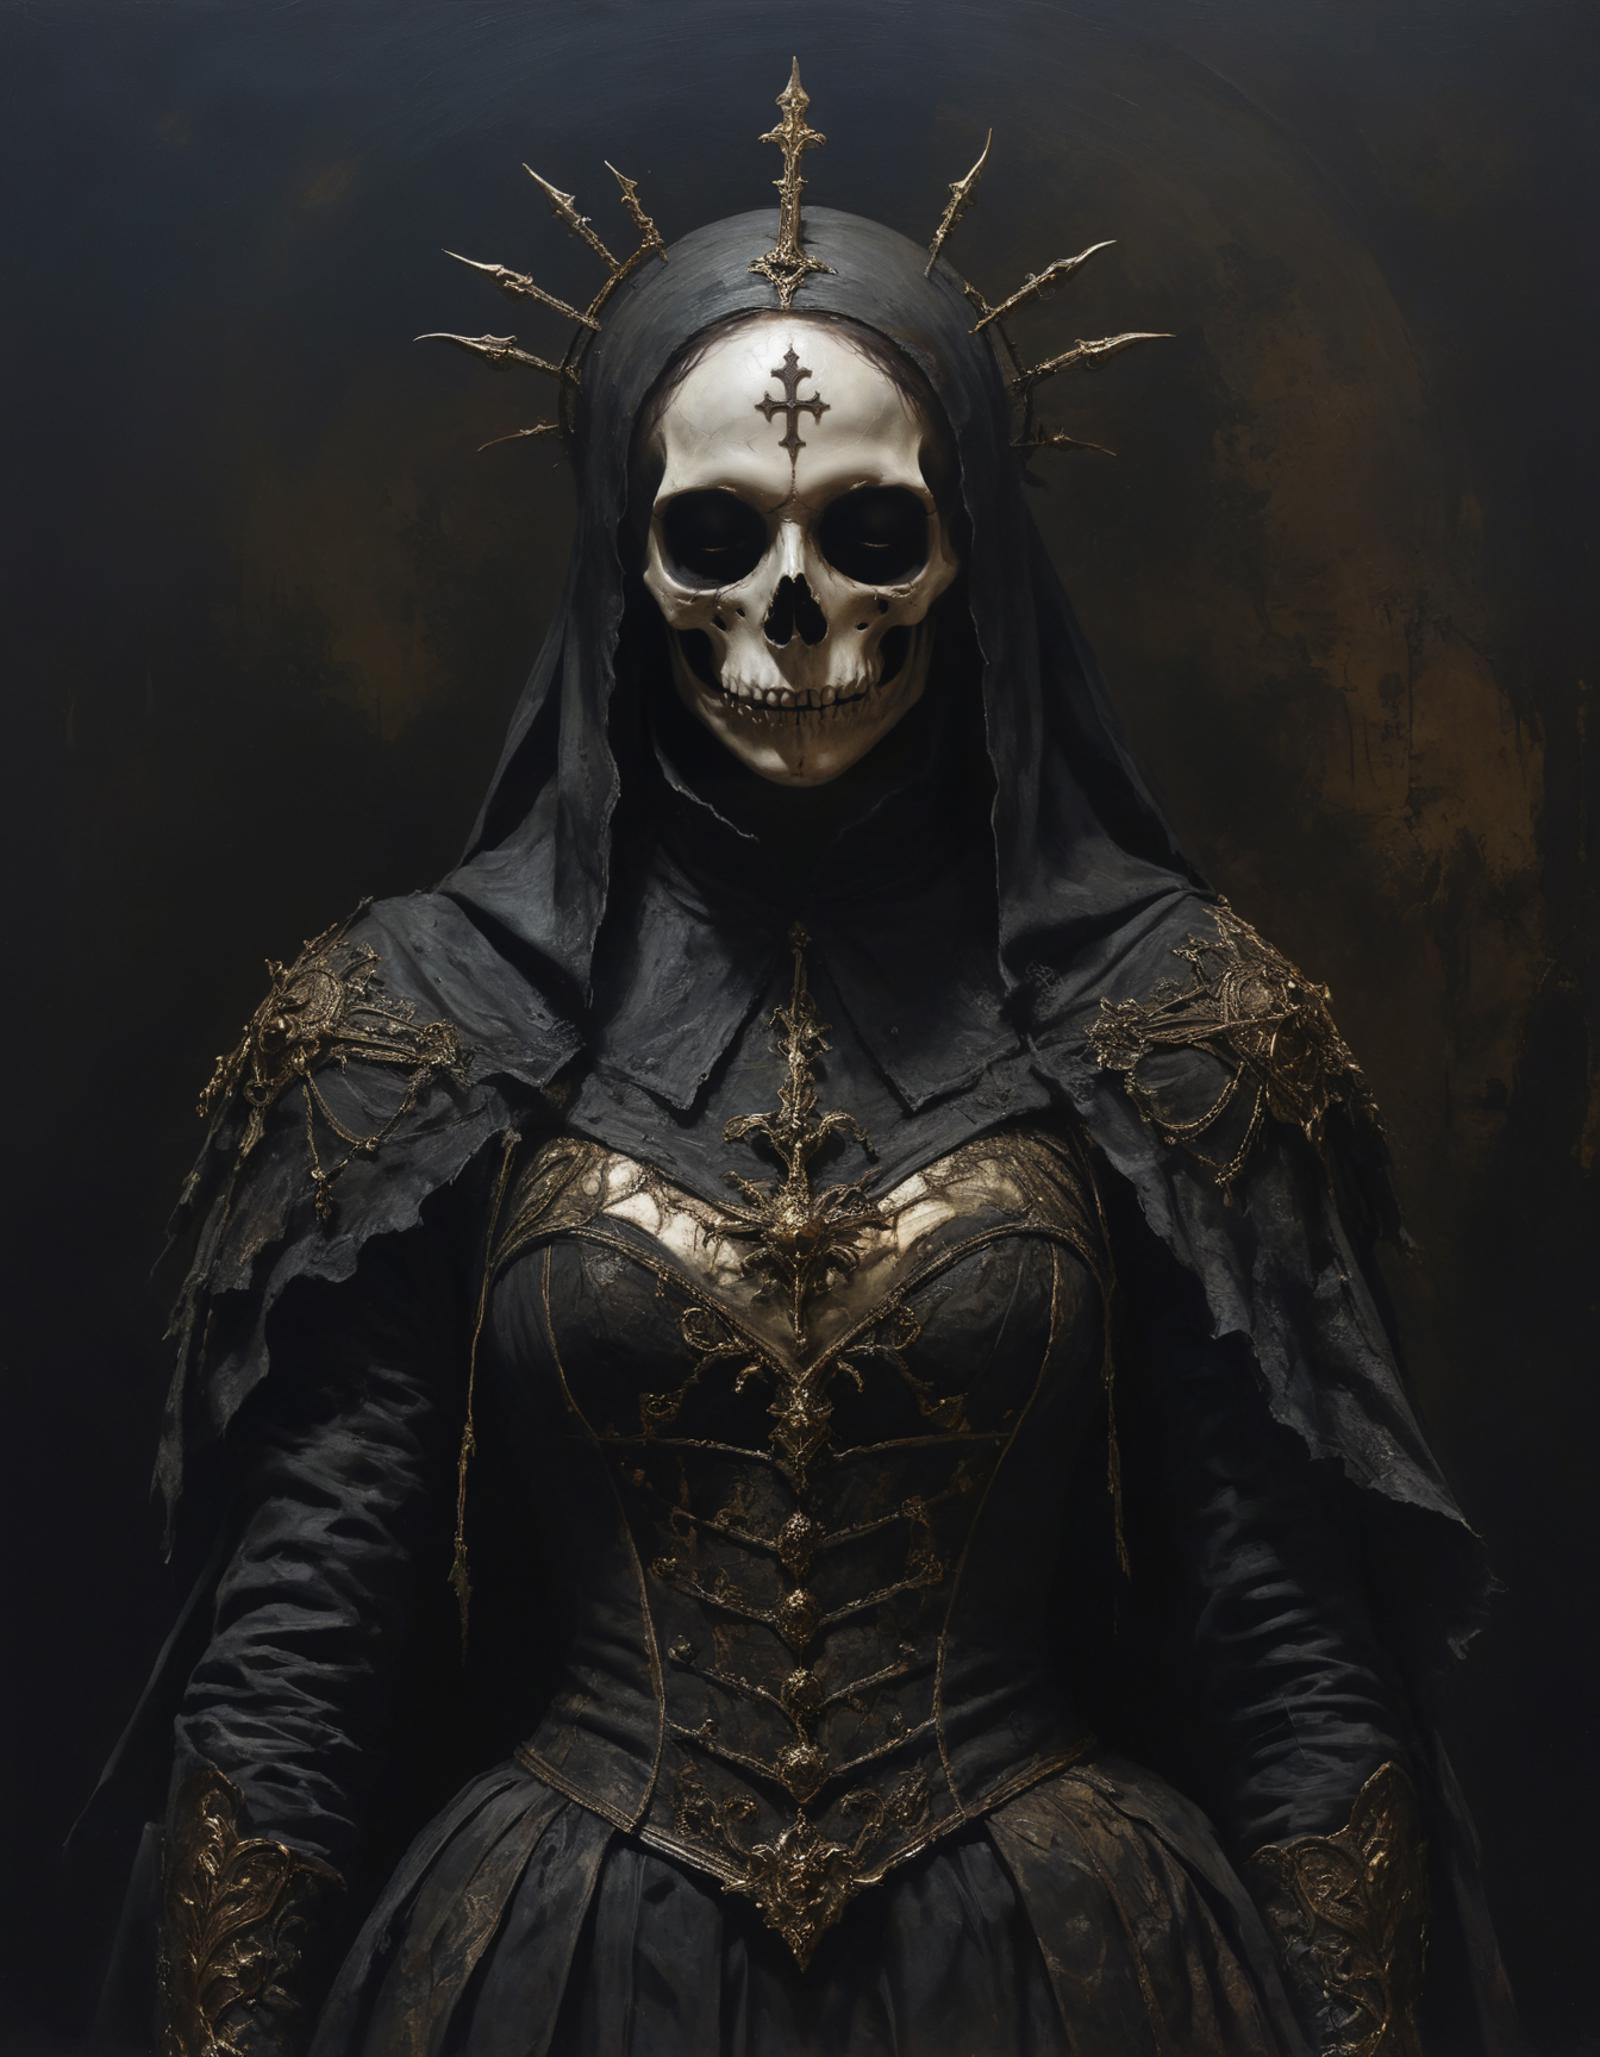 A dark and eerie portrait of a skeleton woman wearing a black dress with gold accents and a cross on her forehead.